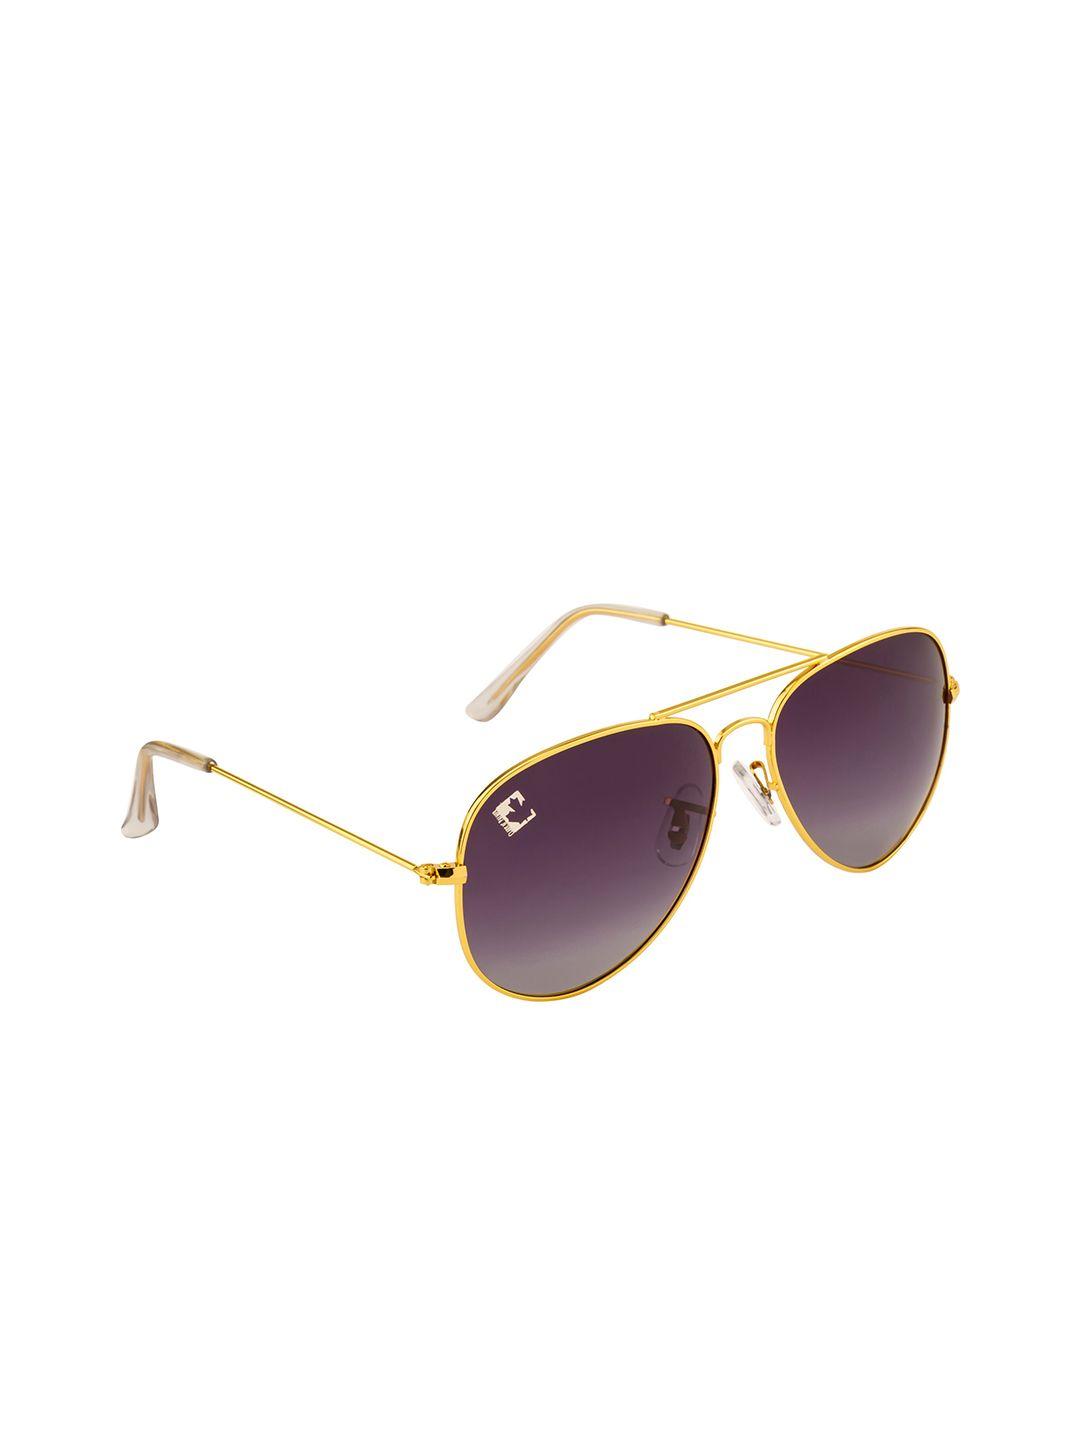 clark n palmer unisex grey lens & gold-toned aviator sunglasses with polarised and uv protected lens